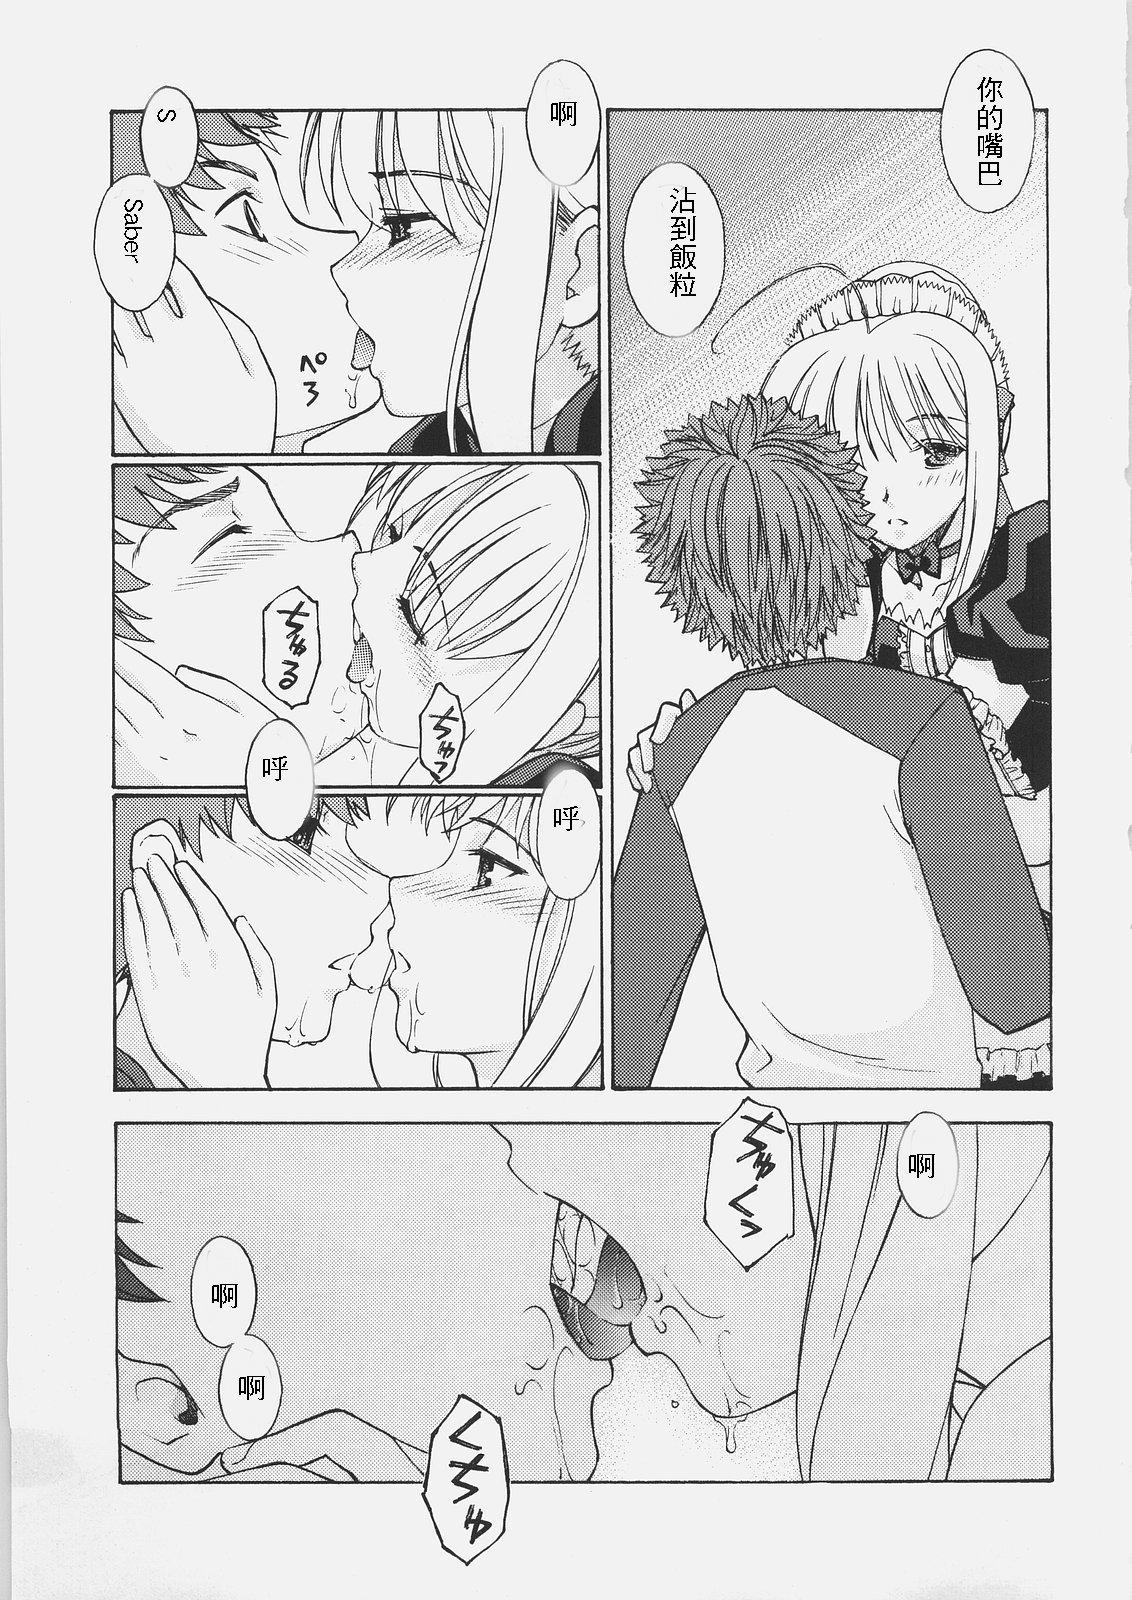 Ecuador HUNGRY LOVER - Fate stay night Reverse Cowgirl - Page 11